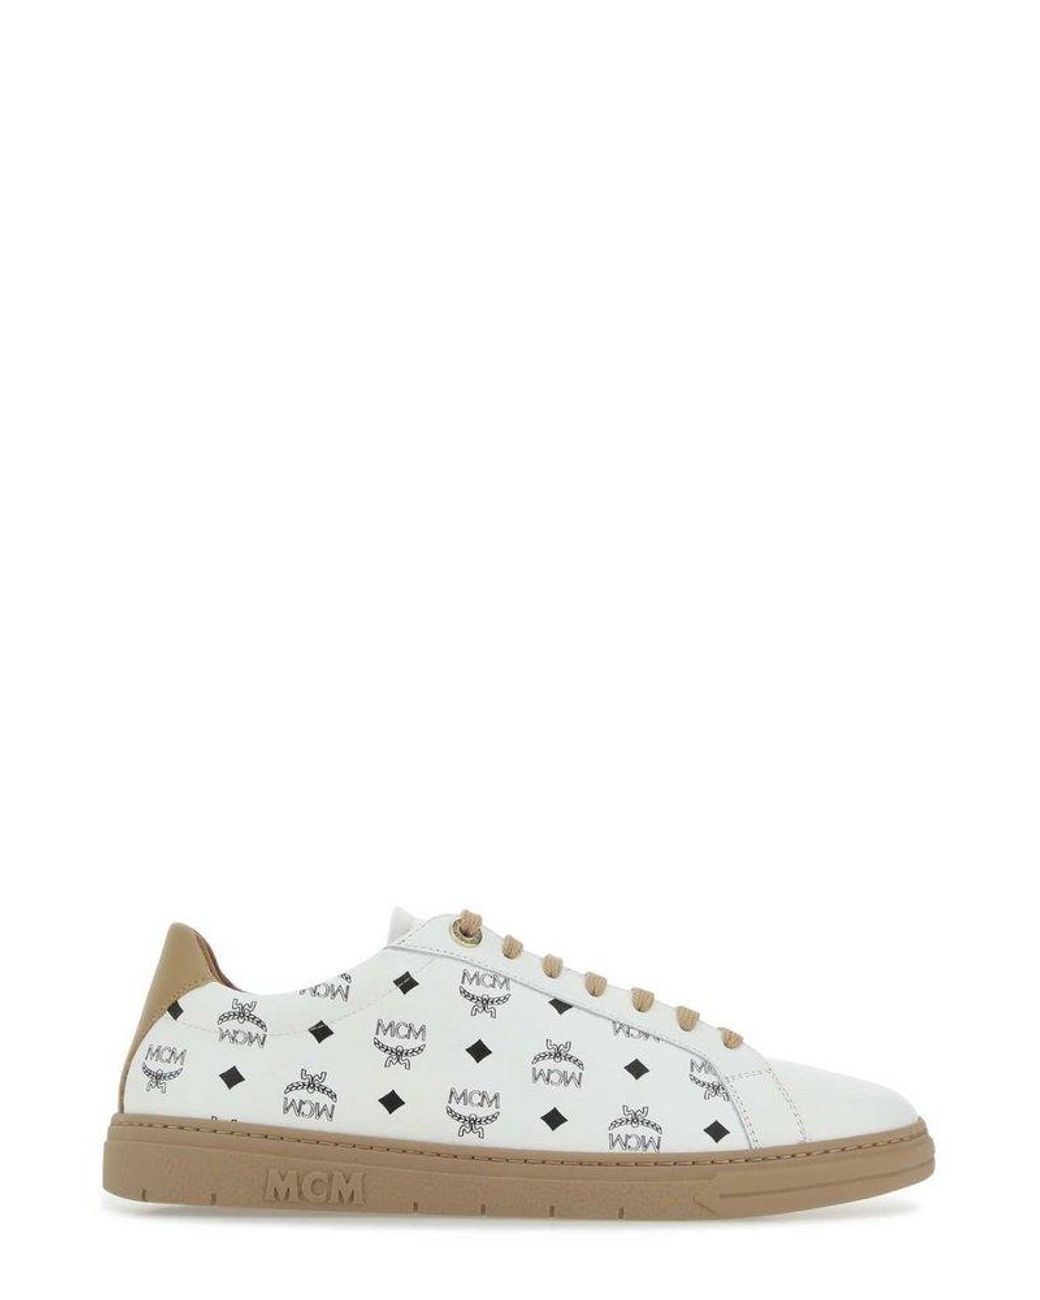 MCM Monogram Print Lace-up Sneakers in White for Men | Lyst